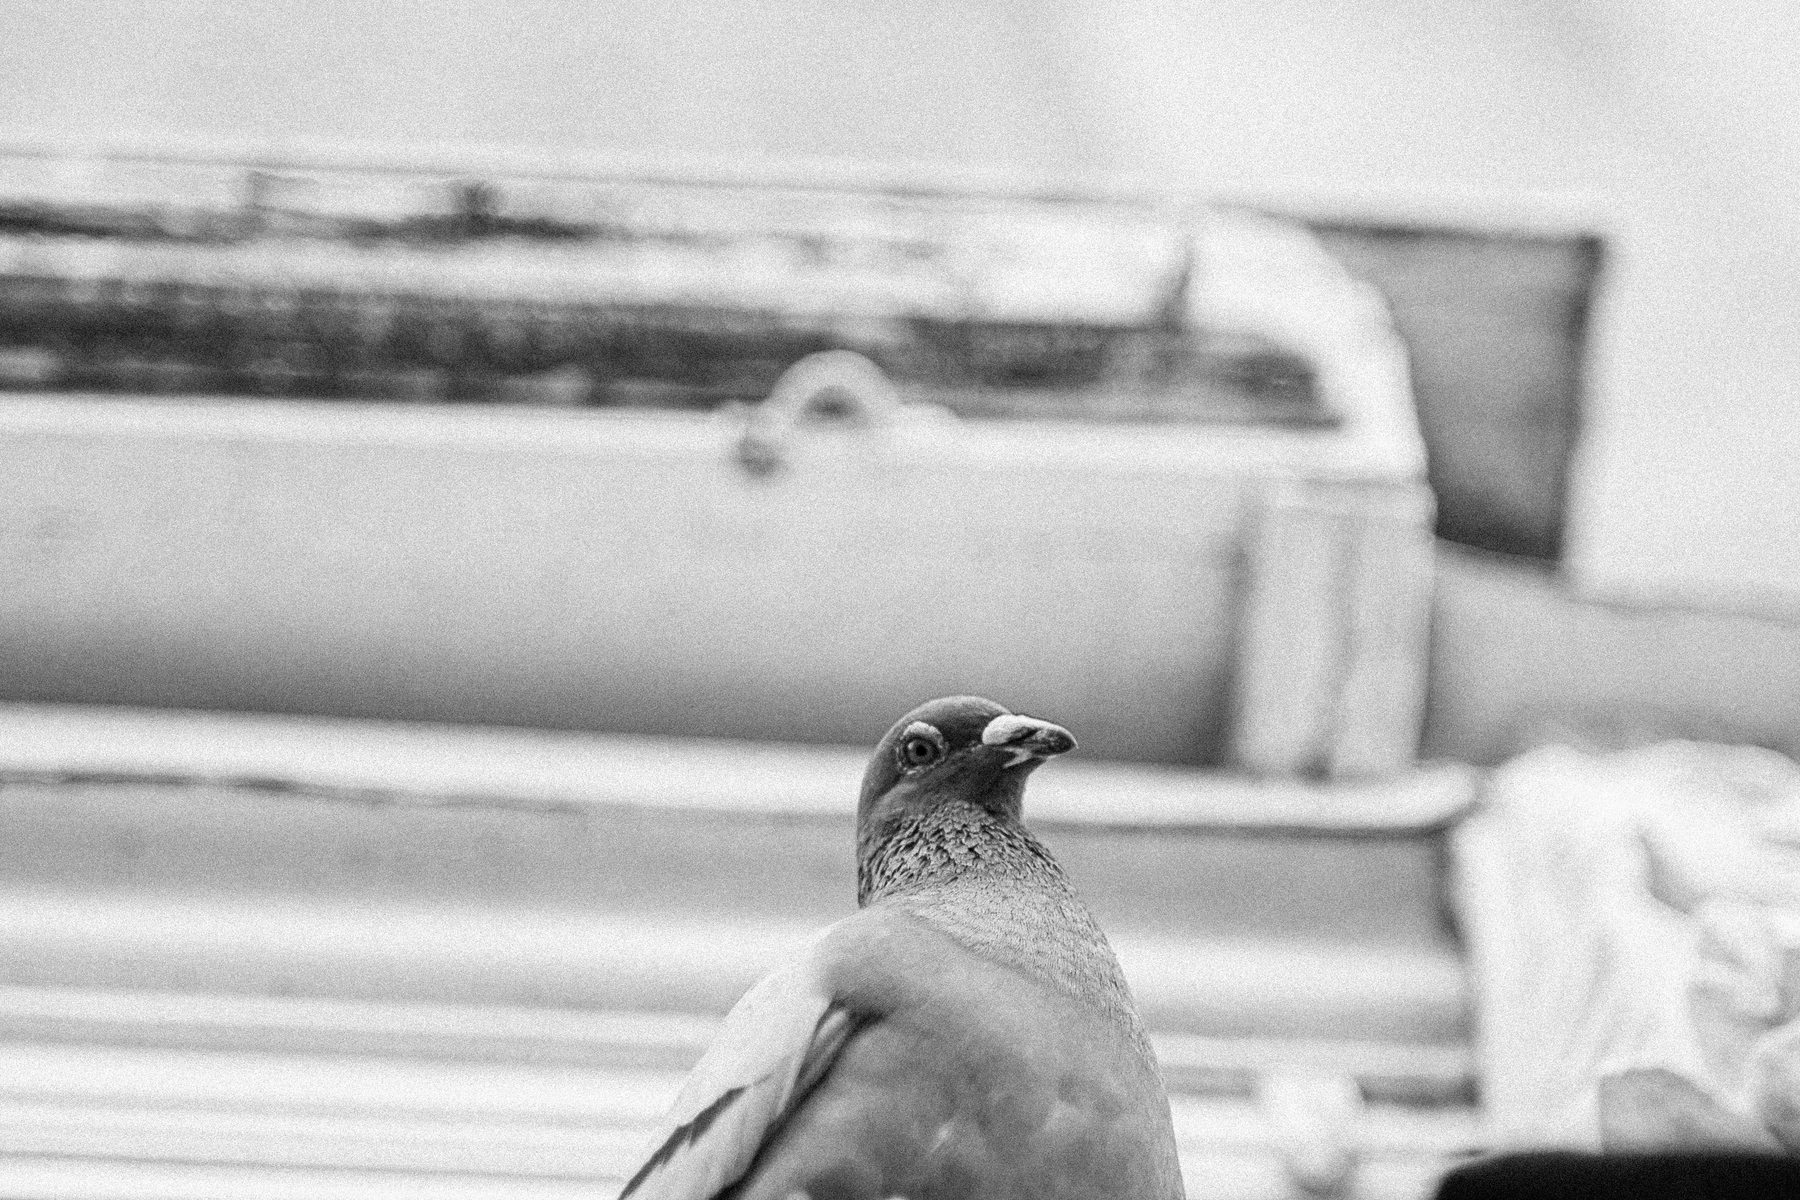 A pigeon stares down at the camera